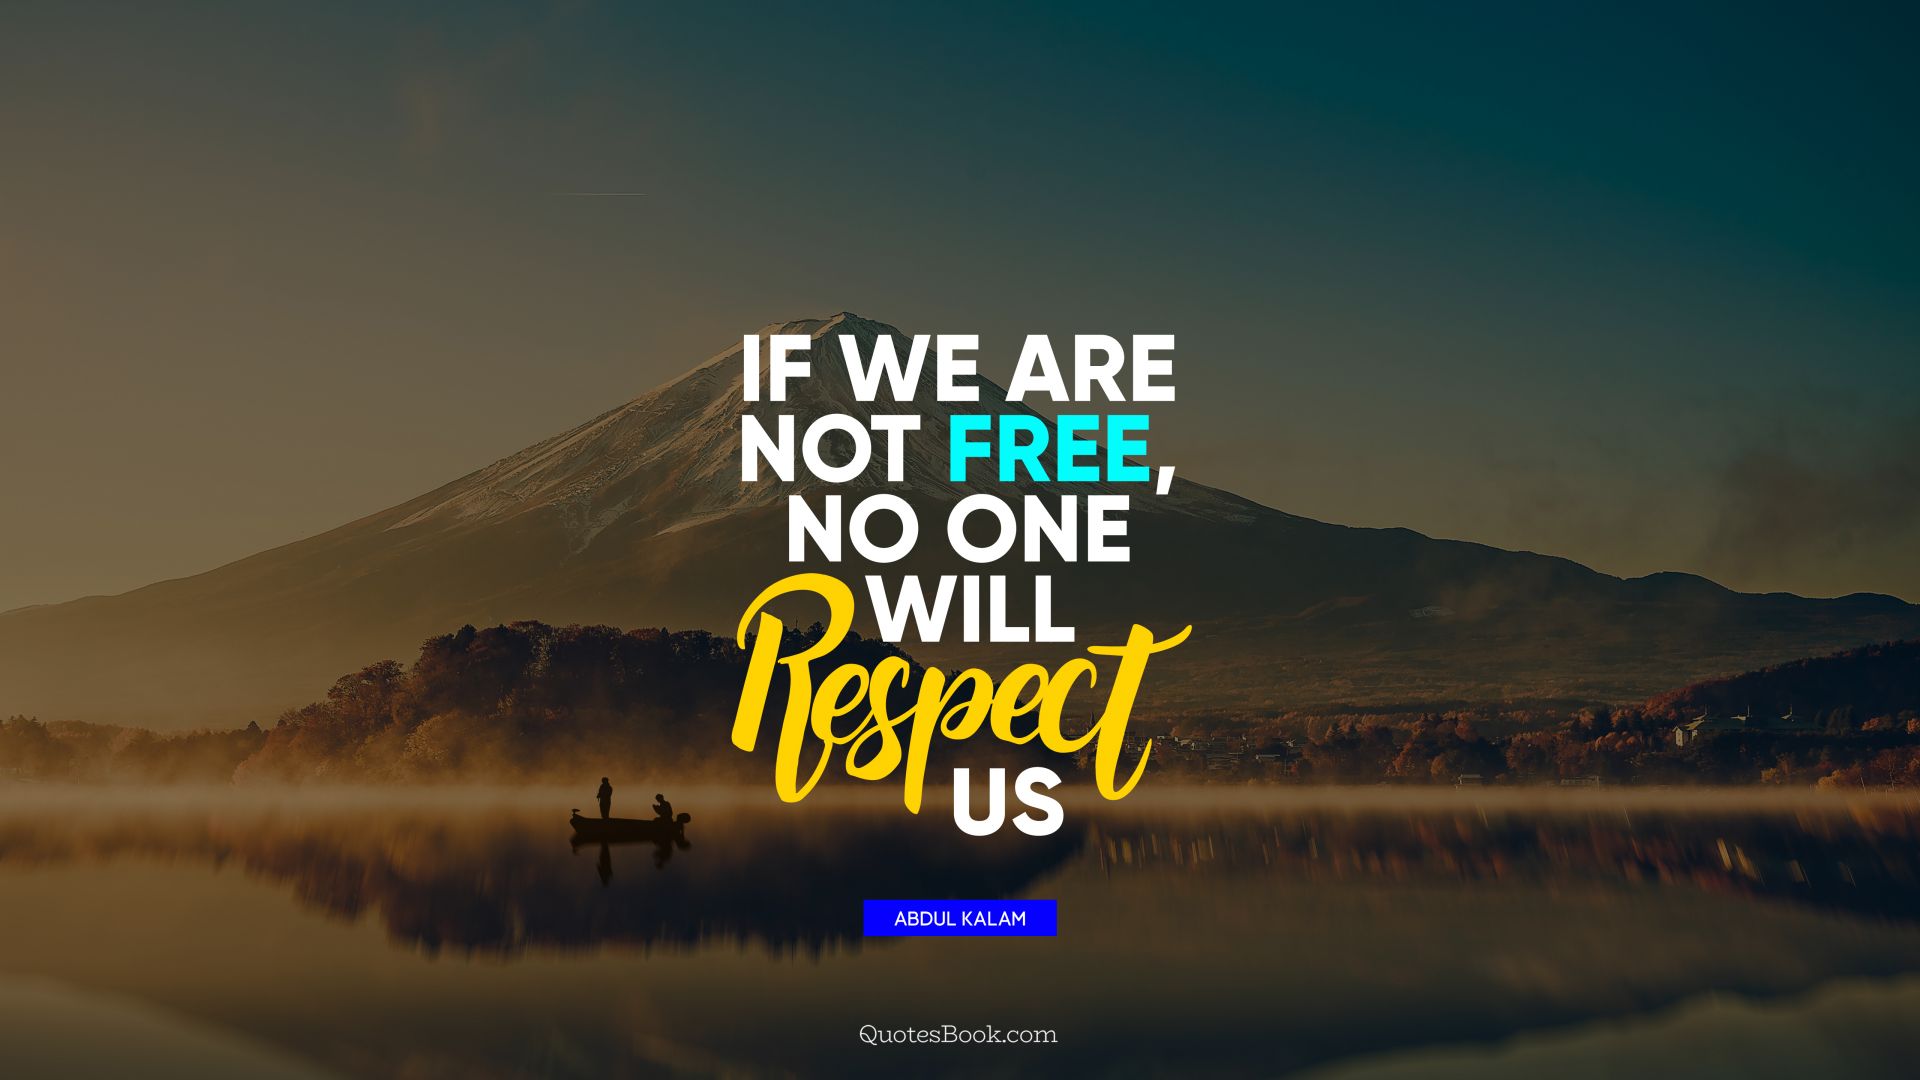 If we are not free, no one will respect us. - Quote by Abdul Kalam